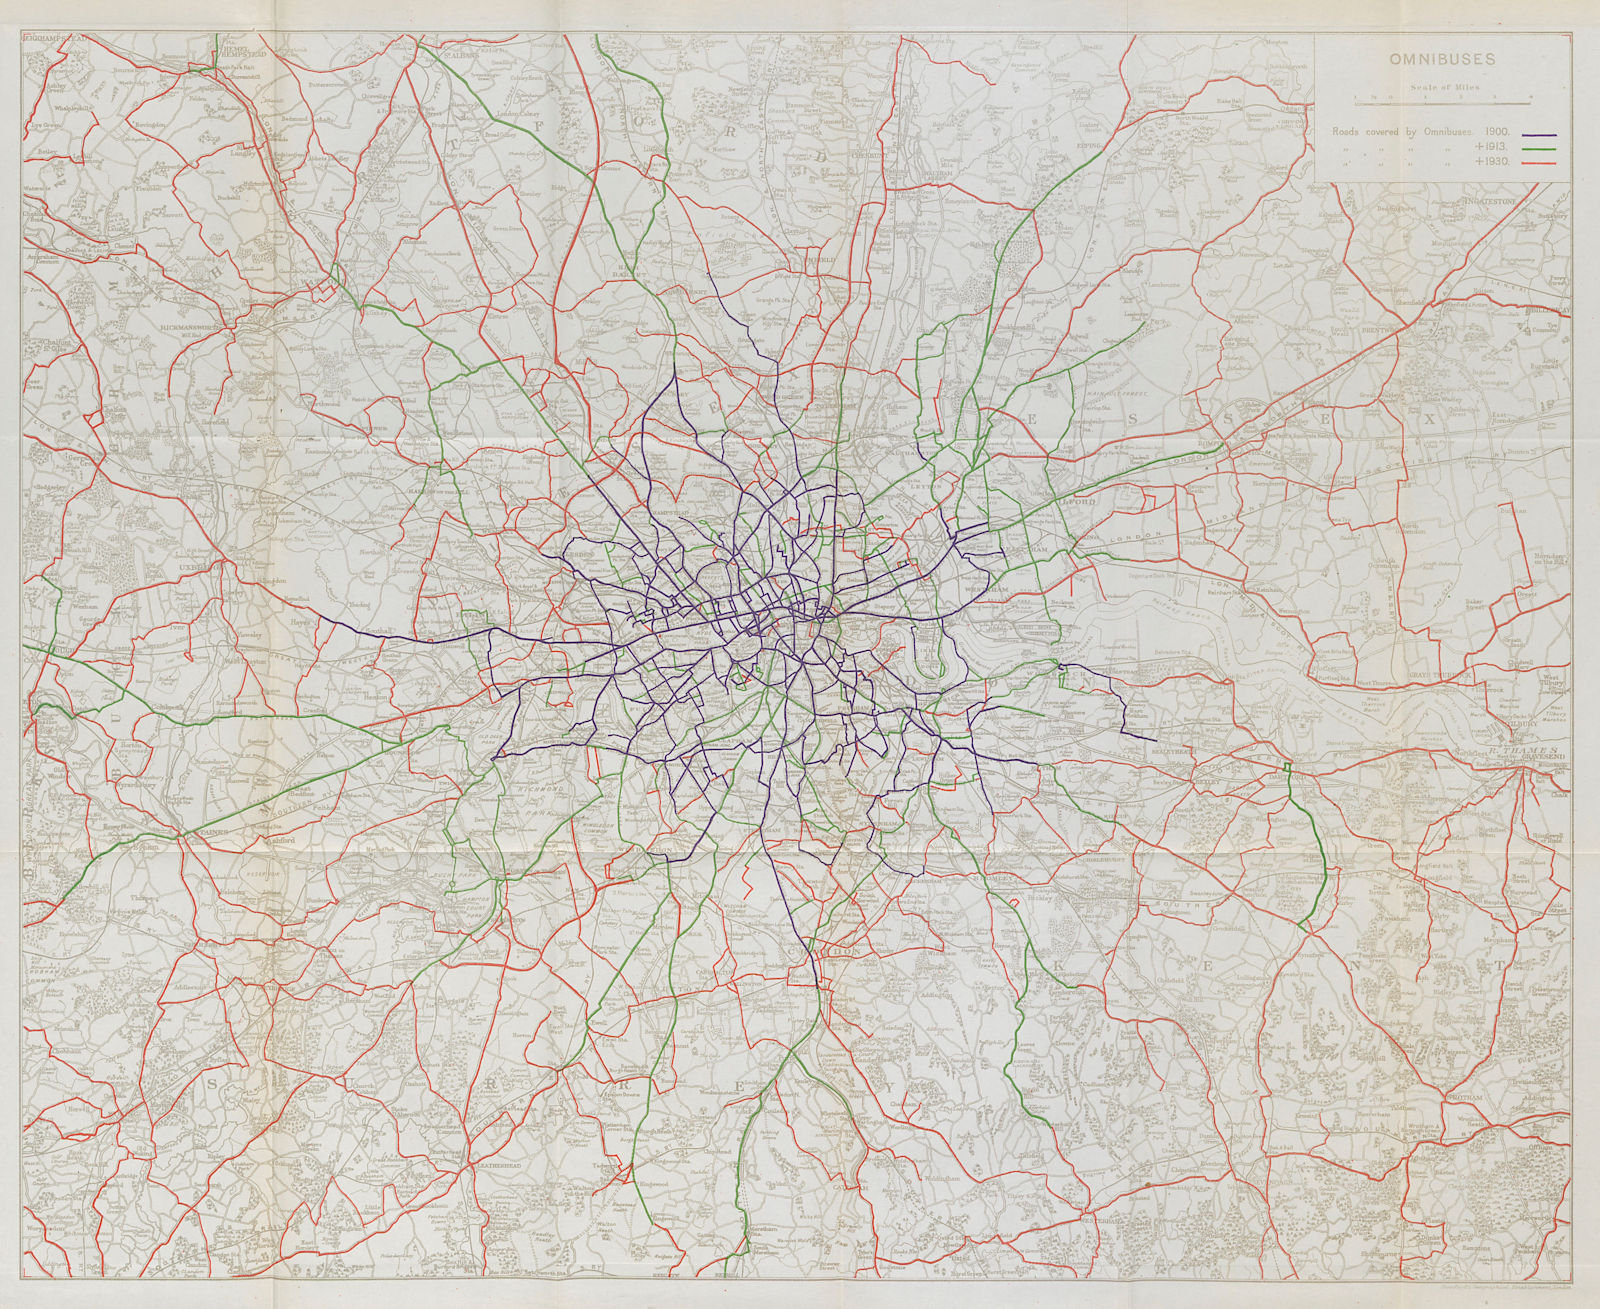 Associate Product London omnibus route development 1900-1930. STANFORD 1931 old vintage map